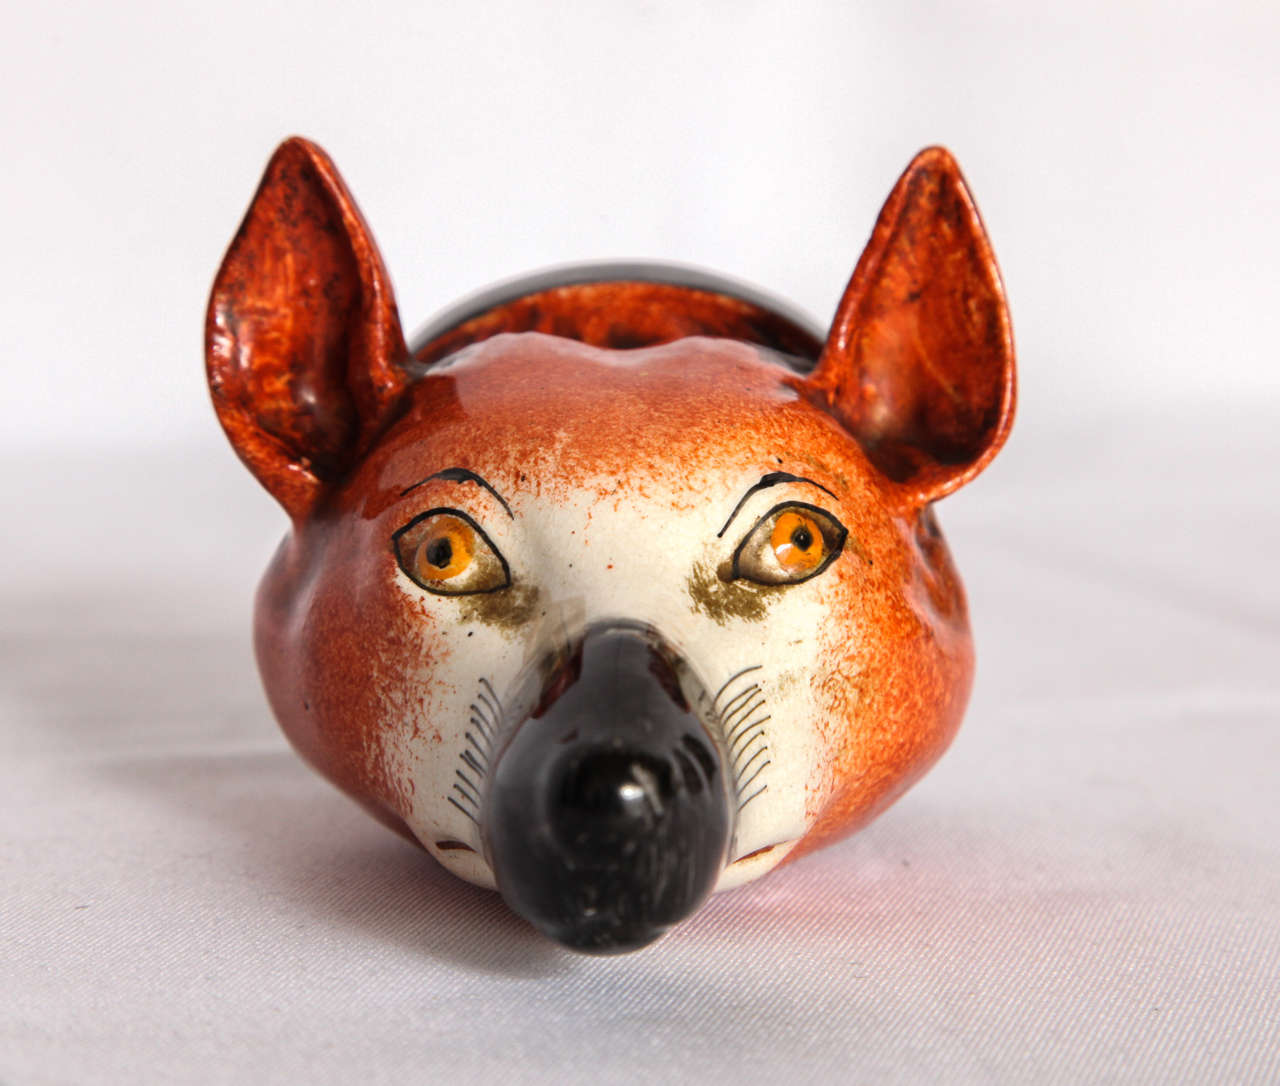 Antique English porcelain stirrup cup in the form of a red fox head. 
Dimension: 2.5